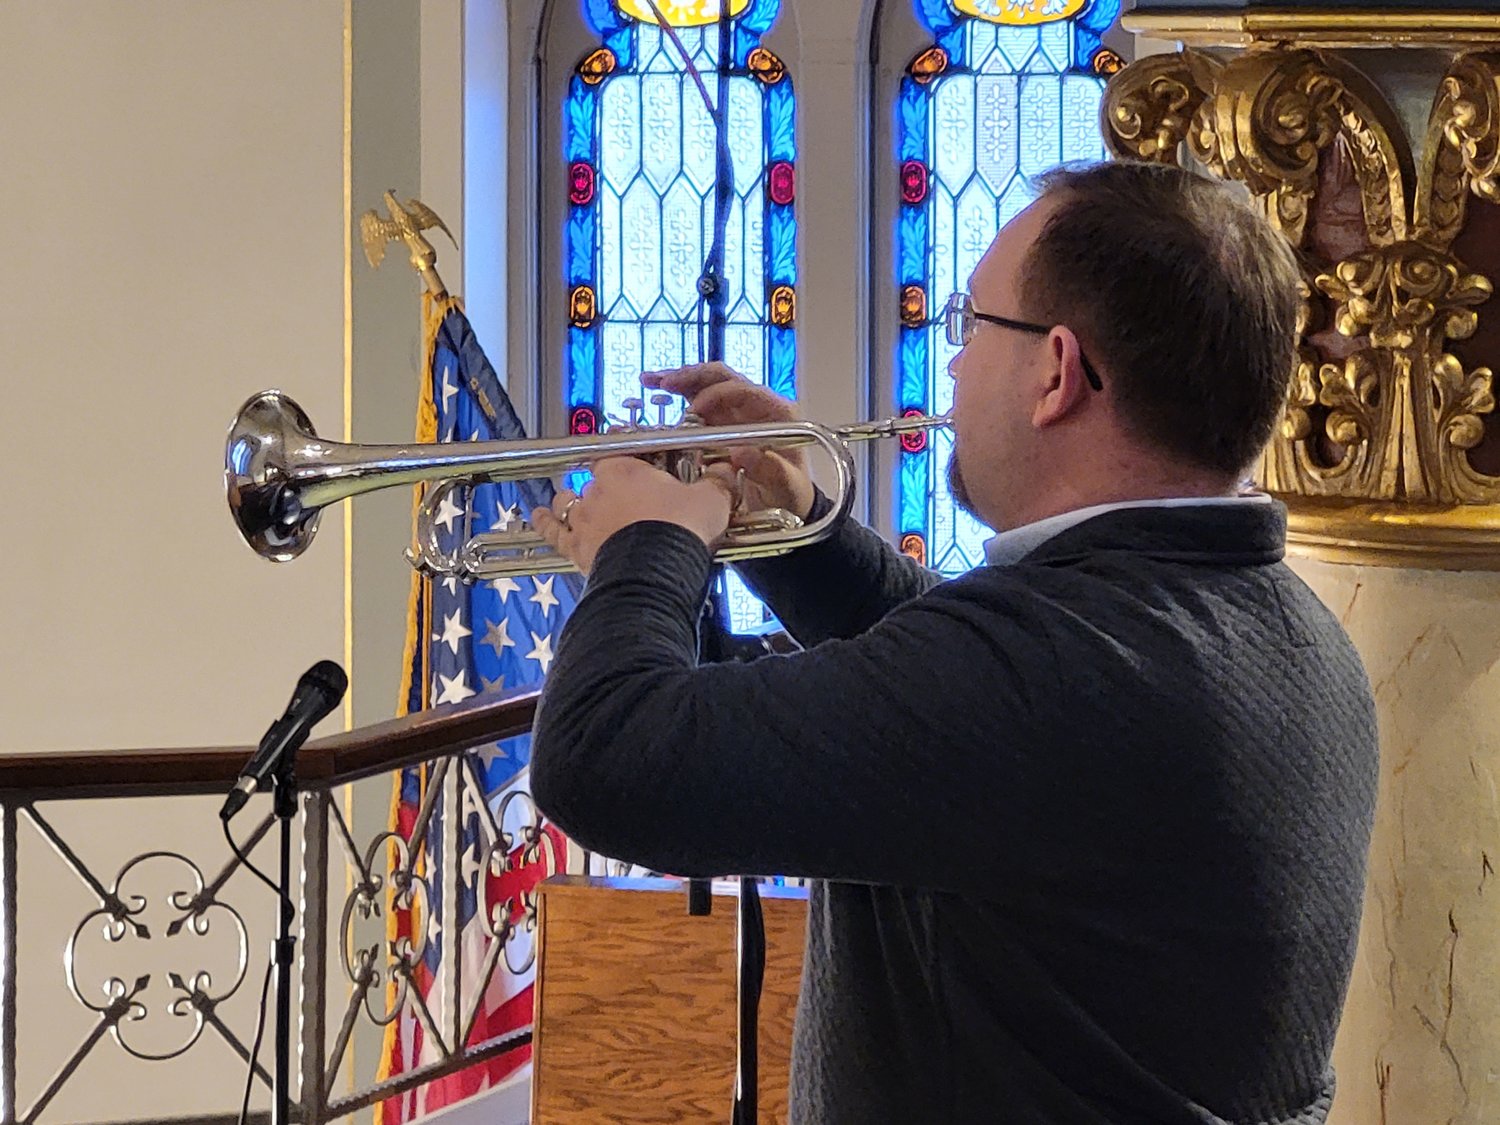 Parish Music Director Nicholas Liese plays “Taps” on a bugle during the Veterans Day Prayer Service on Nov. 11 in St. Peter Church in Jefferson City.